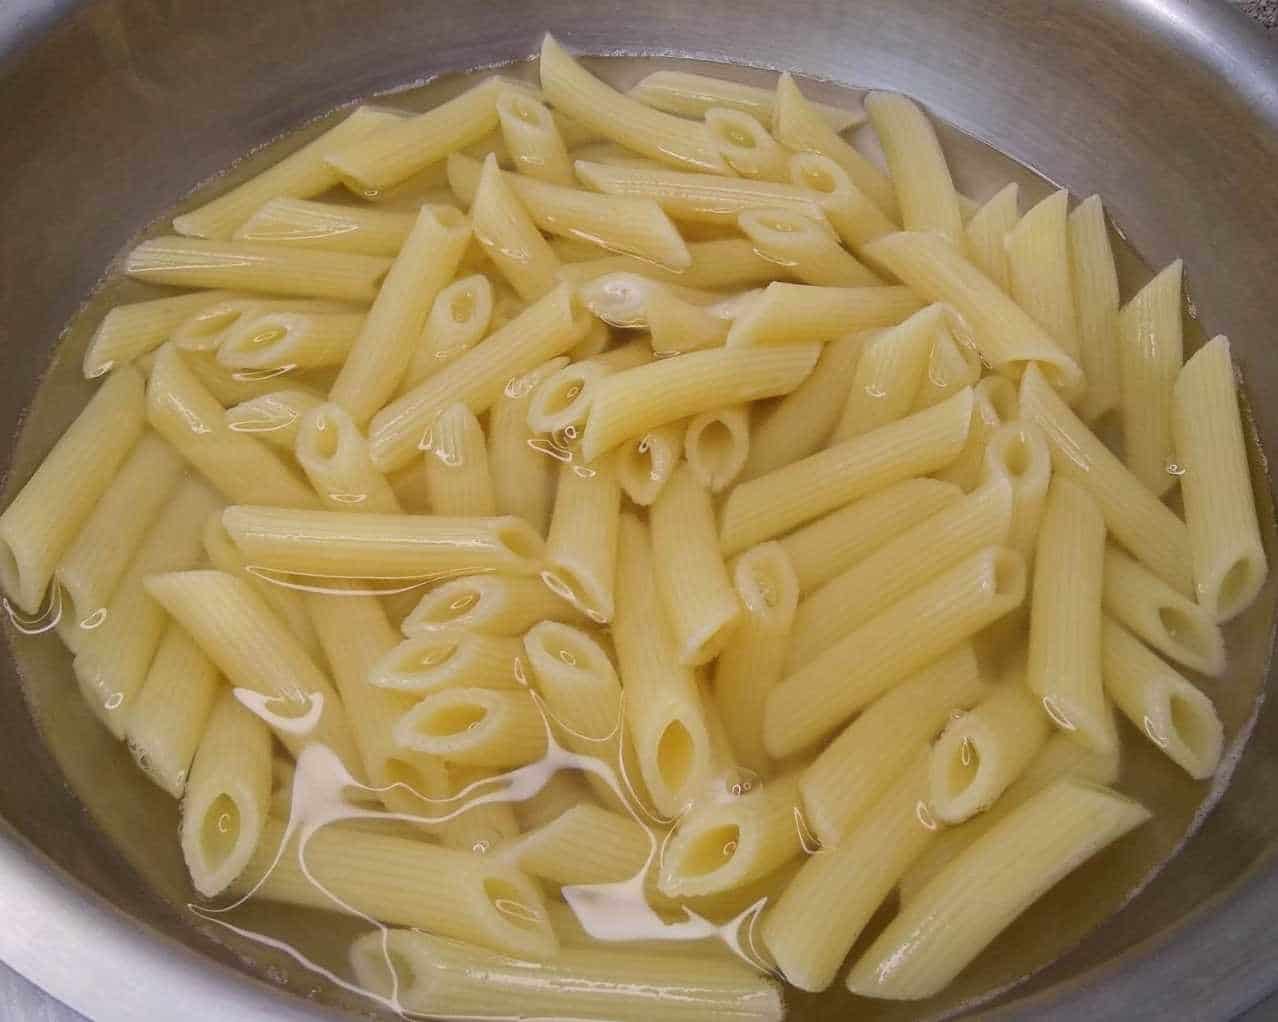 How to Cook the Pasta